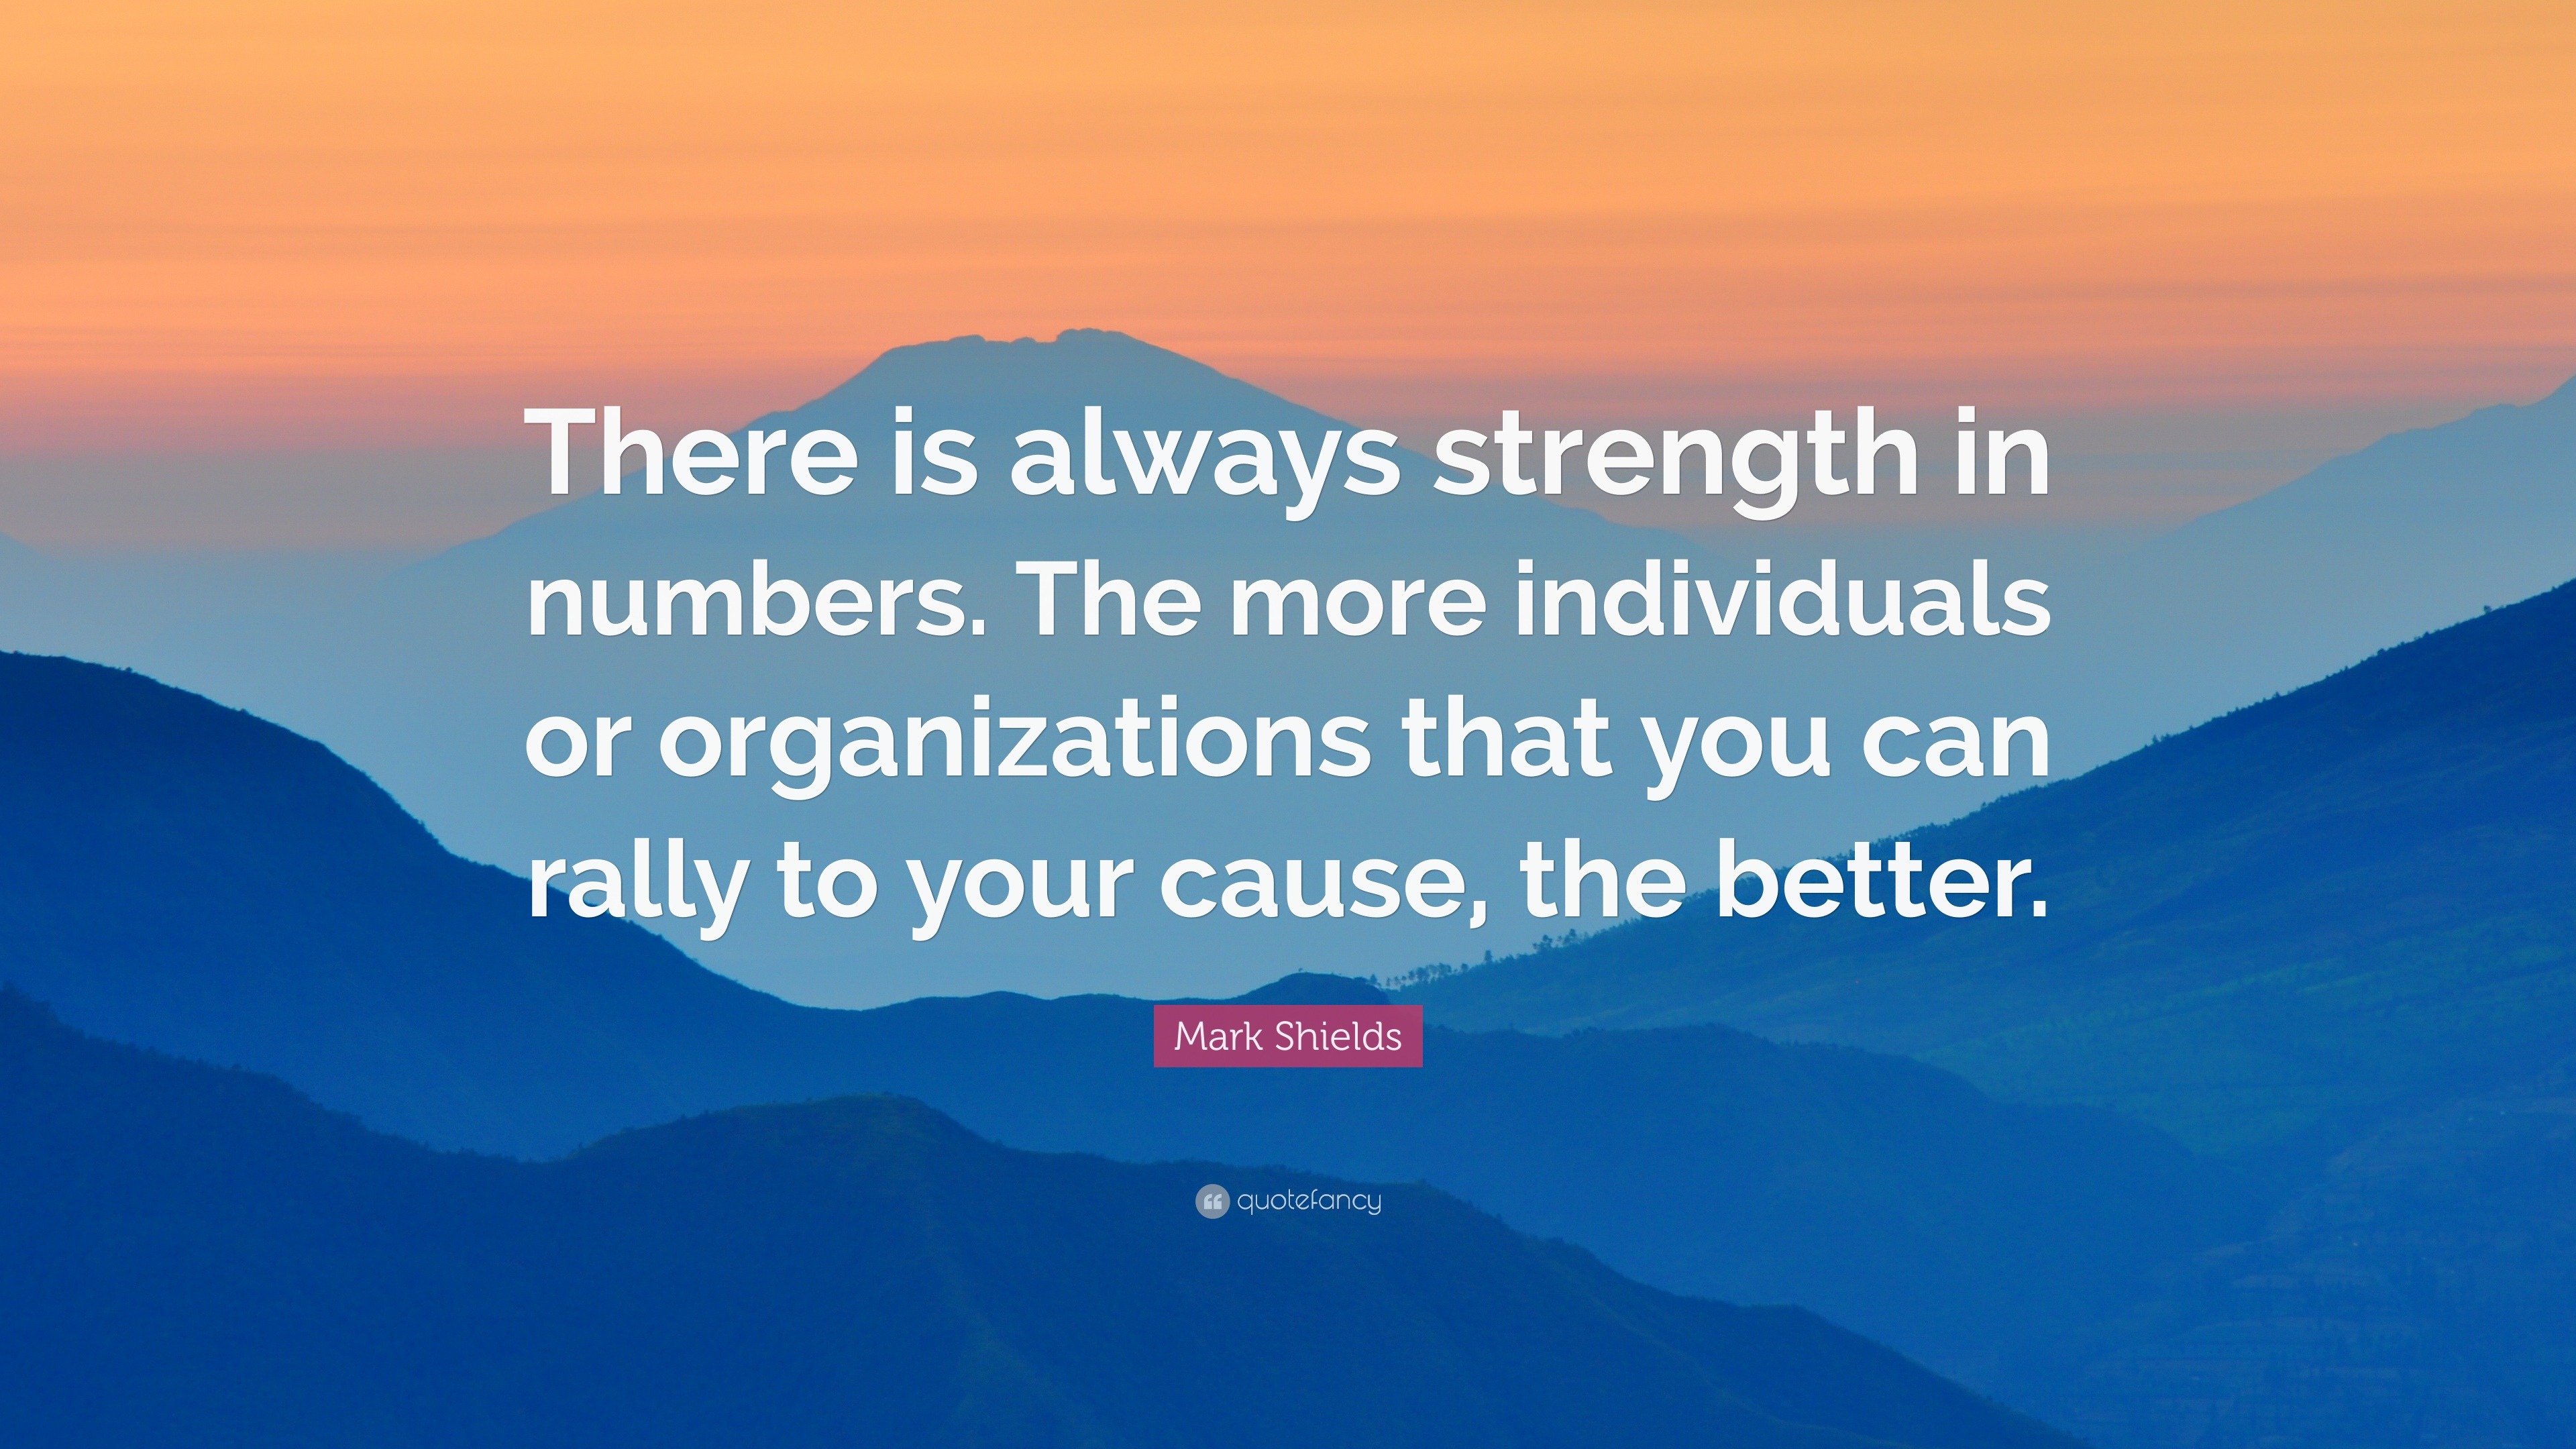 Mark Shields Quote: “There is always strength in numbers. The more  individuals or organizations that you